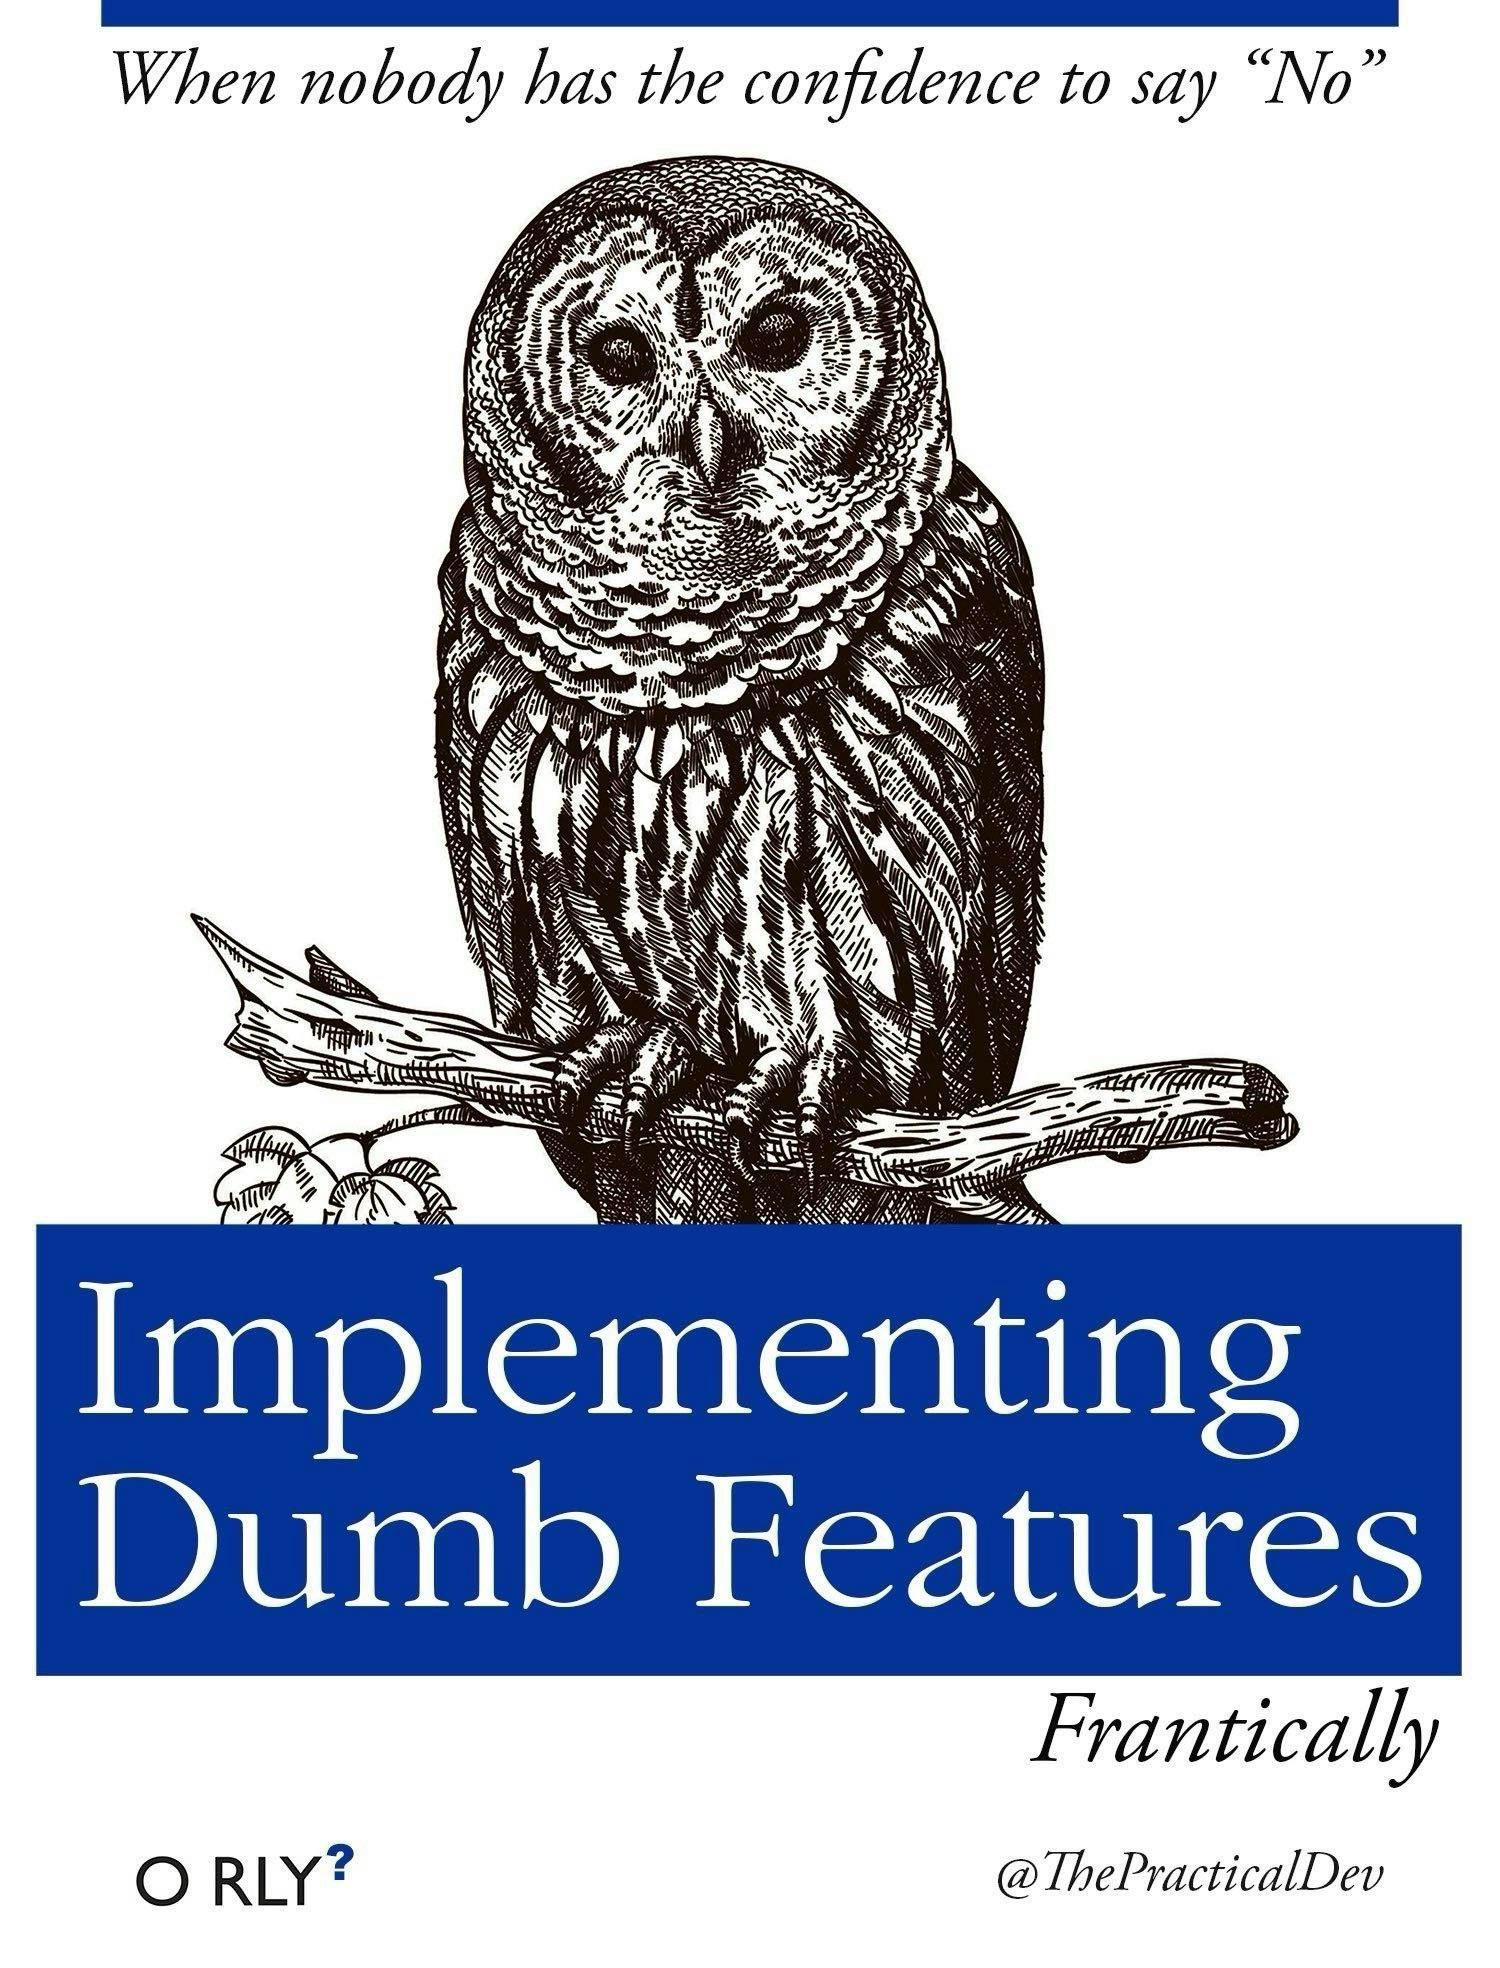 Implementing Dumb Features | When nobody has the confidence to say "No"